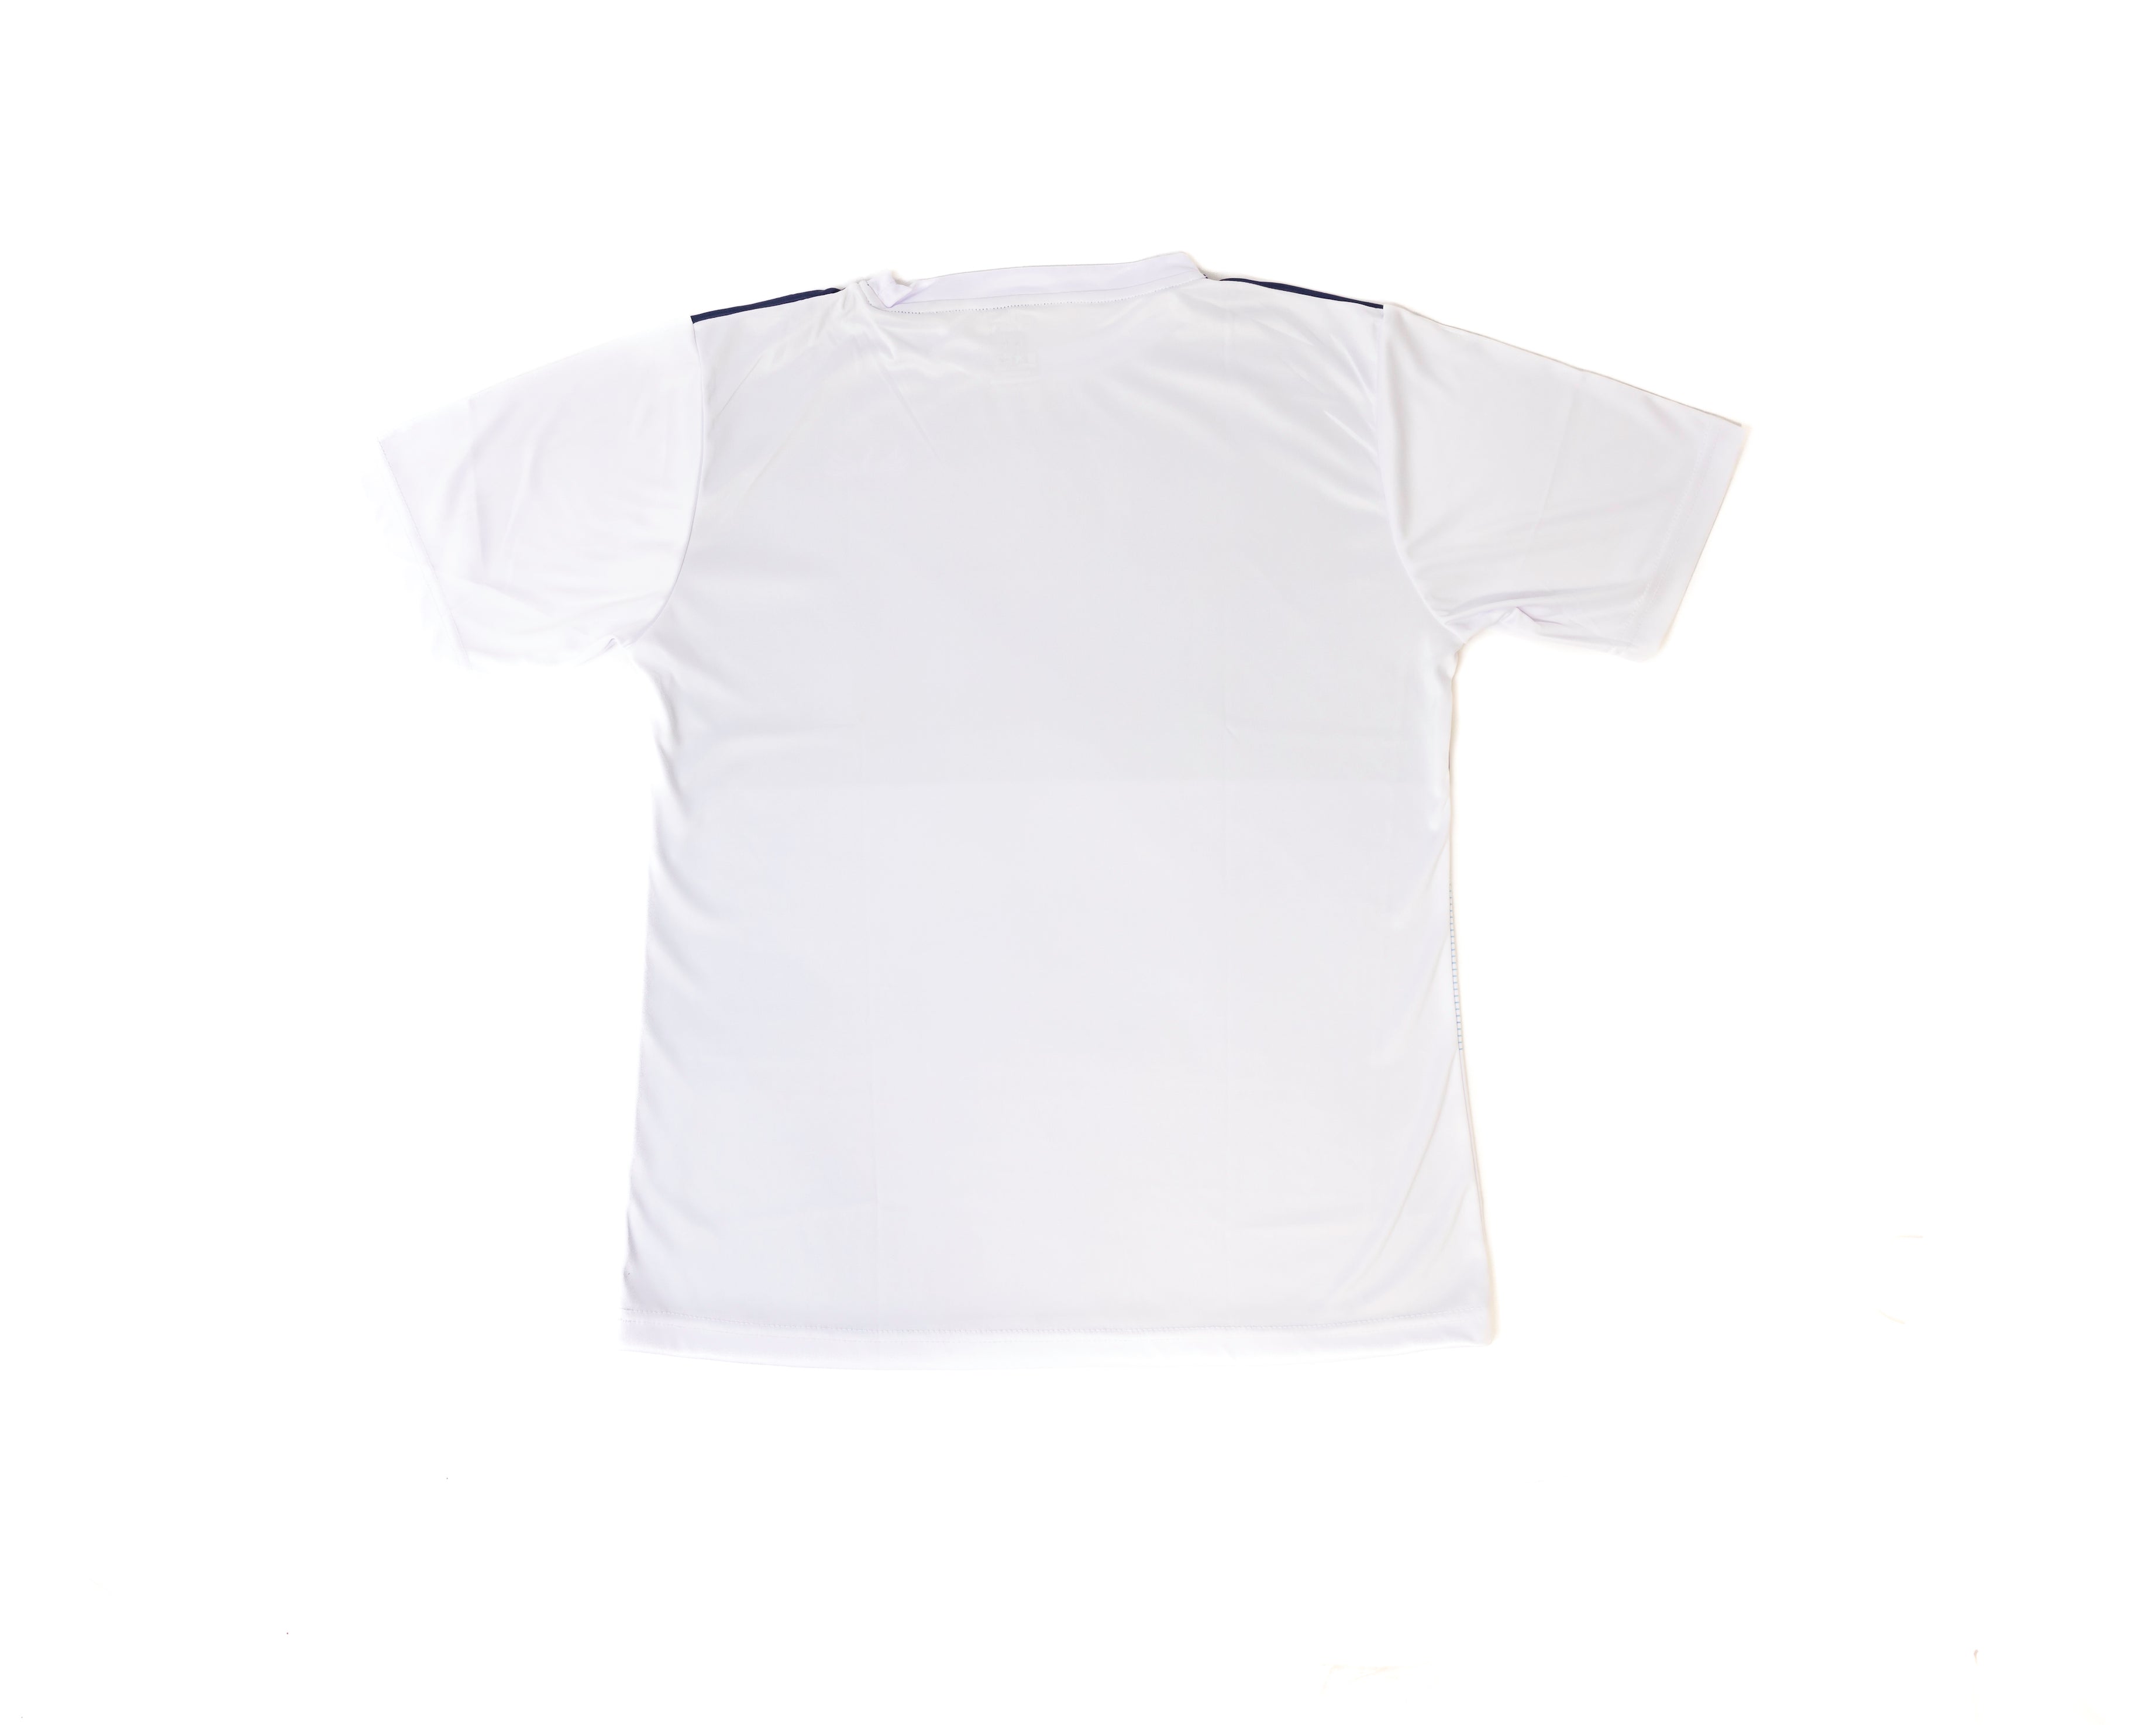 MEN'S COMPETITION SPORT TEE